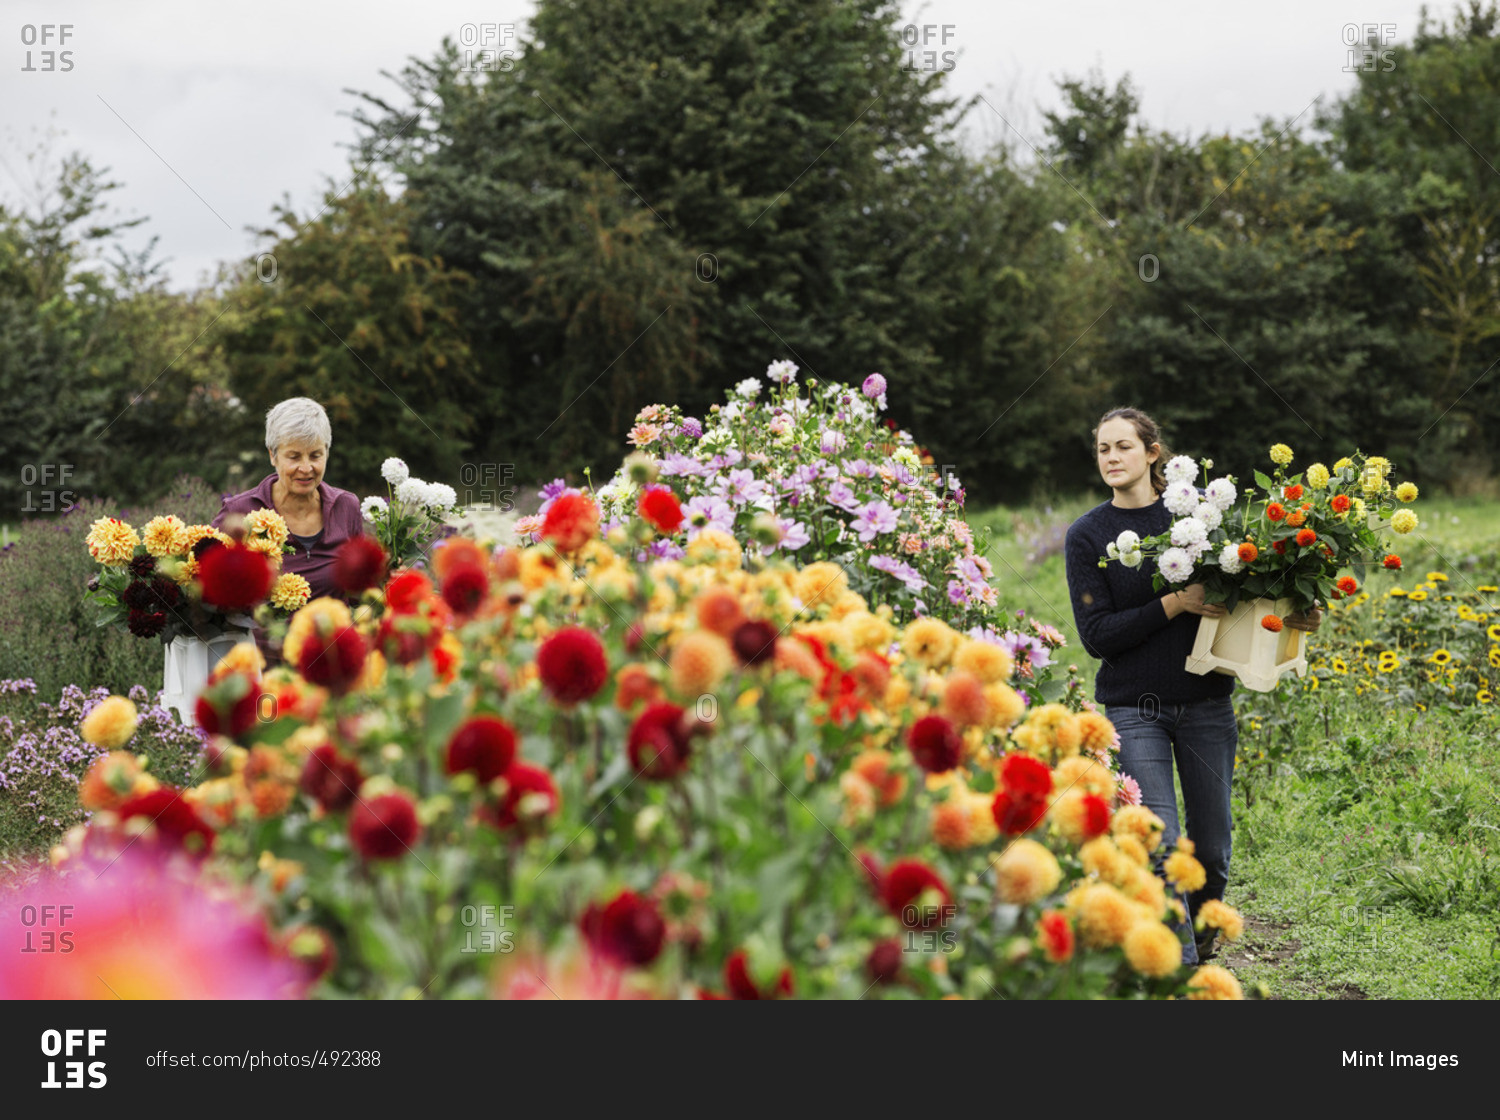 Two people working in an organic flower nursery, cutting flowers for flower arrangements and commercial orders.